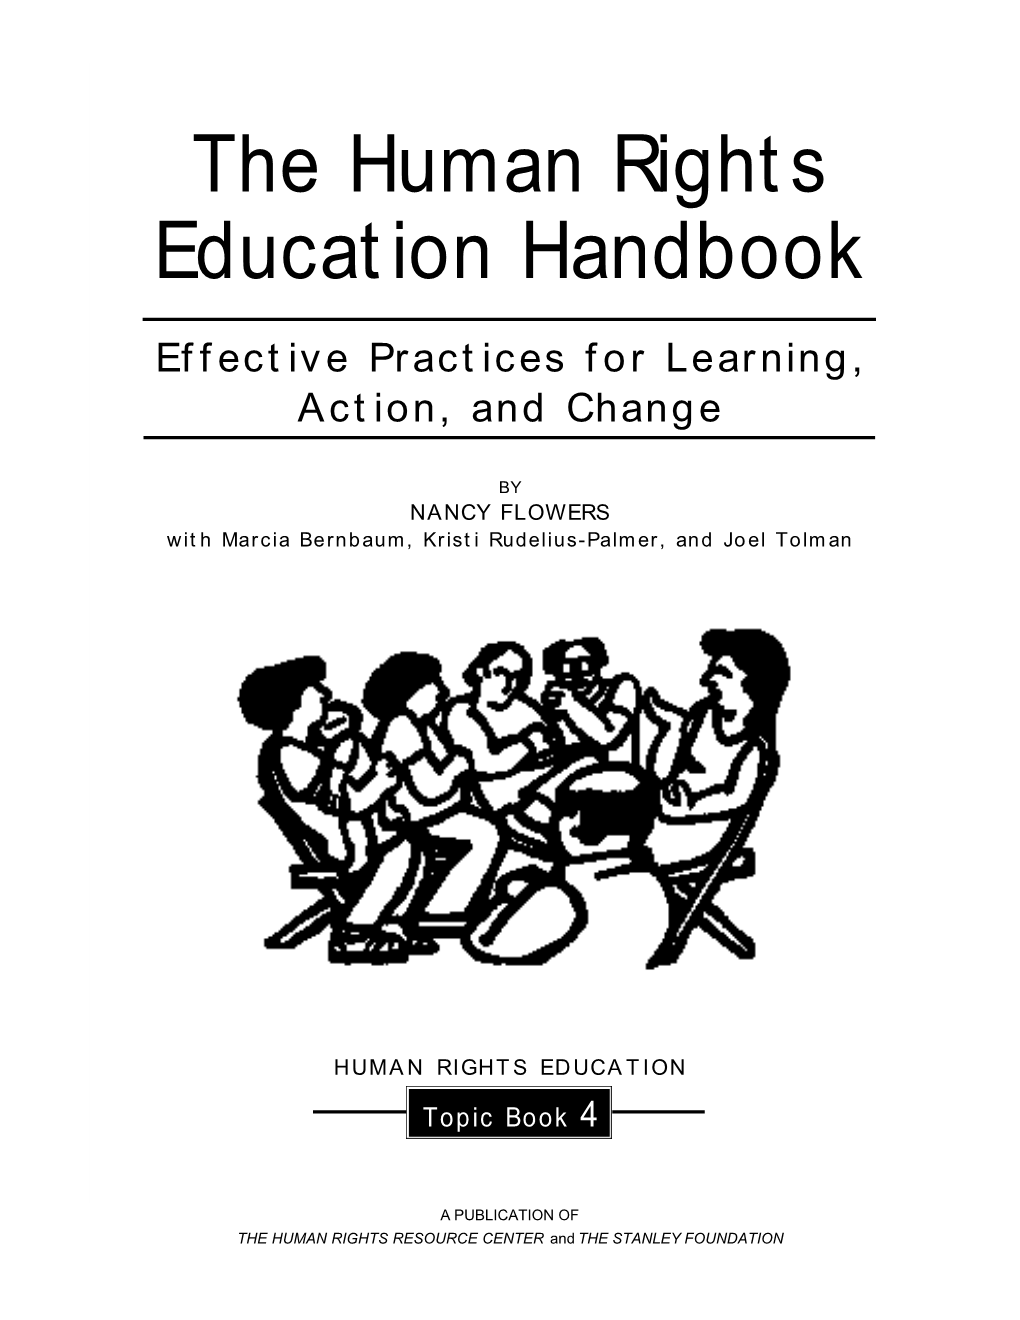 The Human Rights Education Handbook: Effective Practices for Learning, Action, and Change May Be Reproduced Without Permission for Educational Use Only